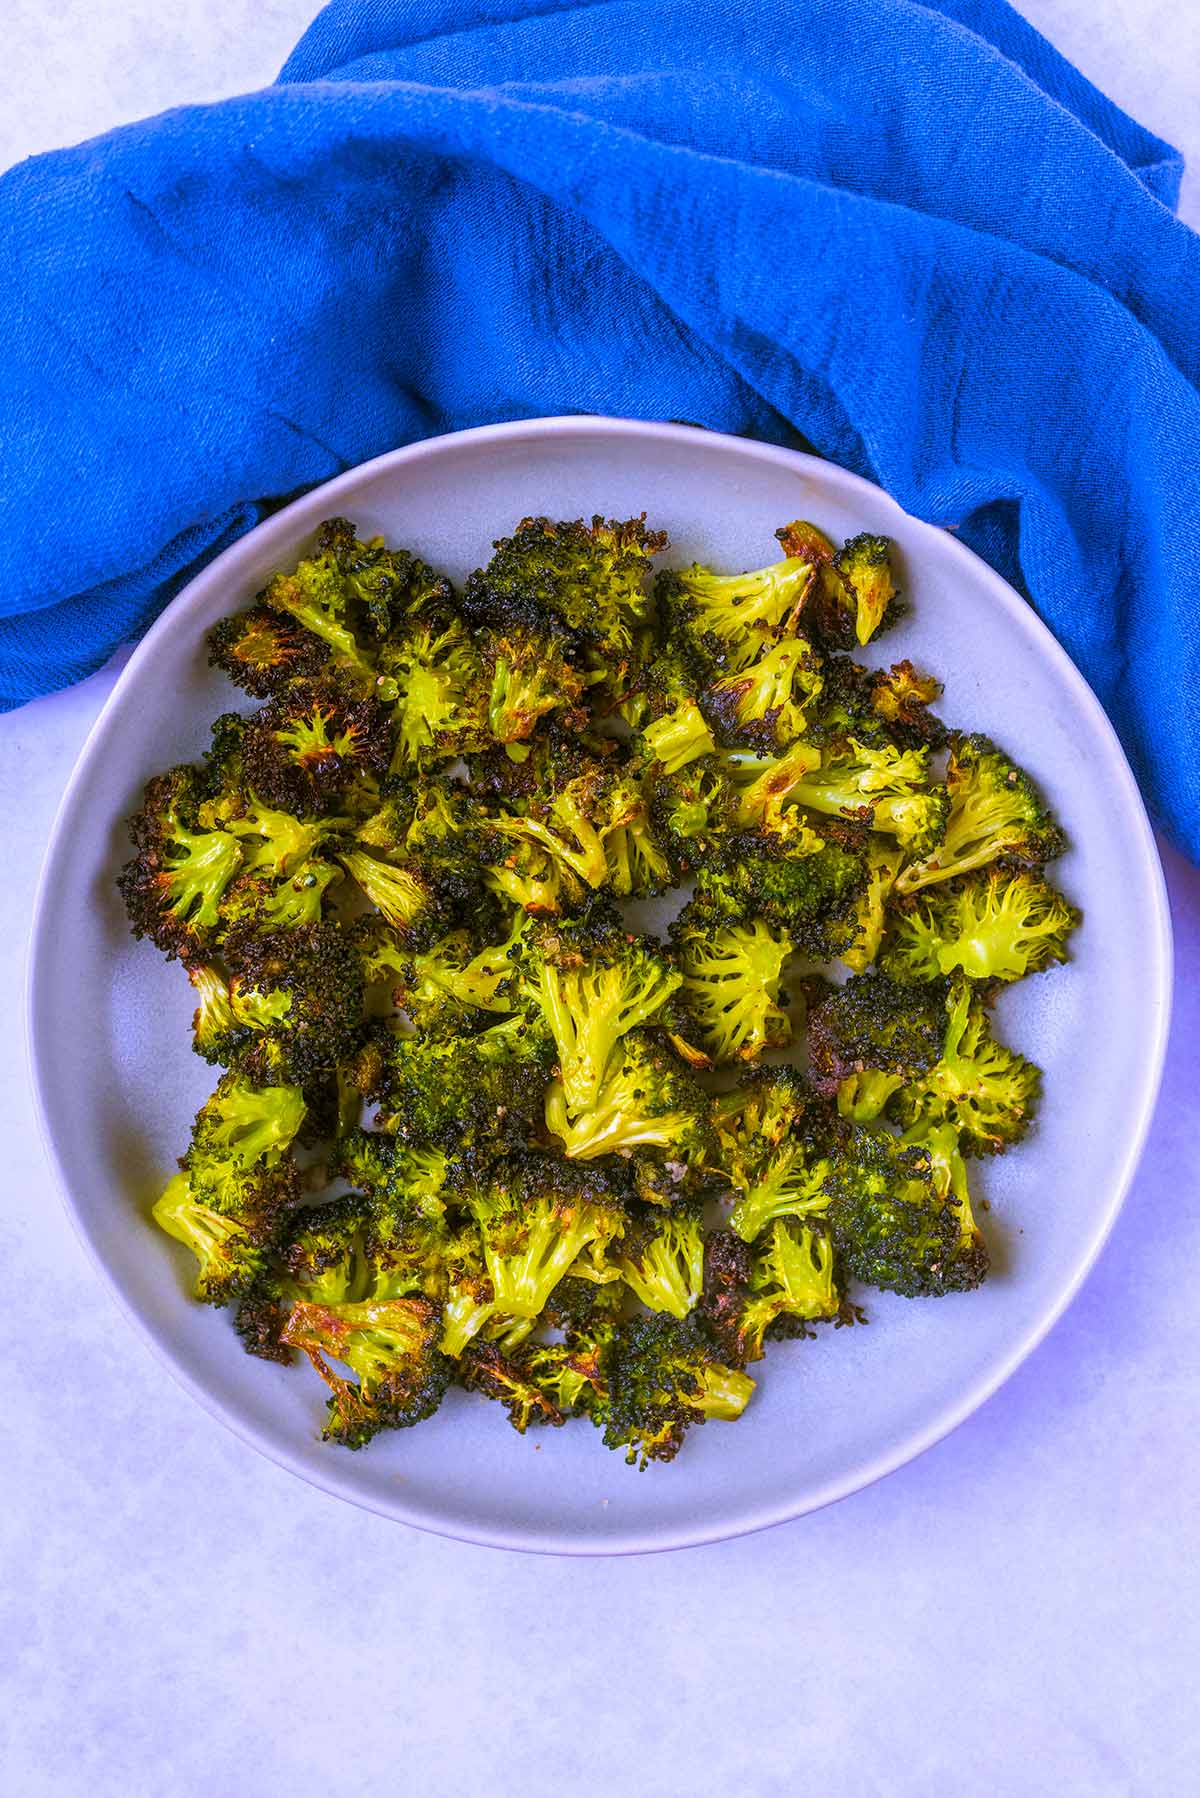 A plate of roasted broccoli next to a blue towel.